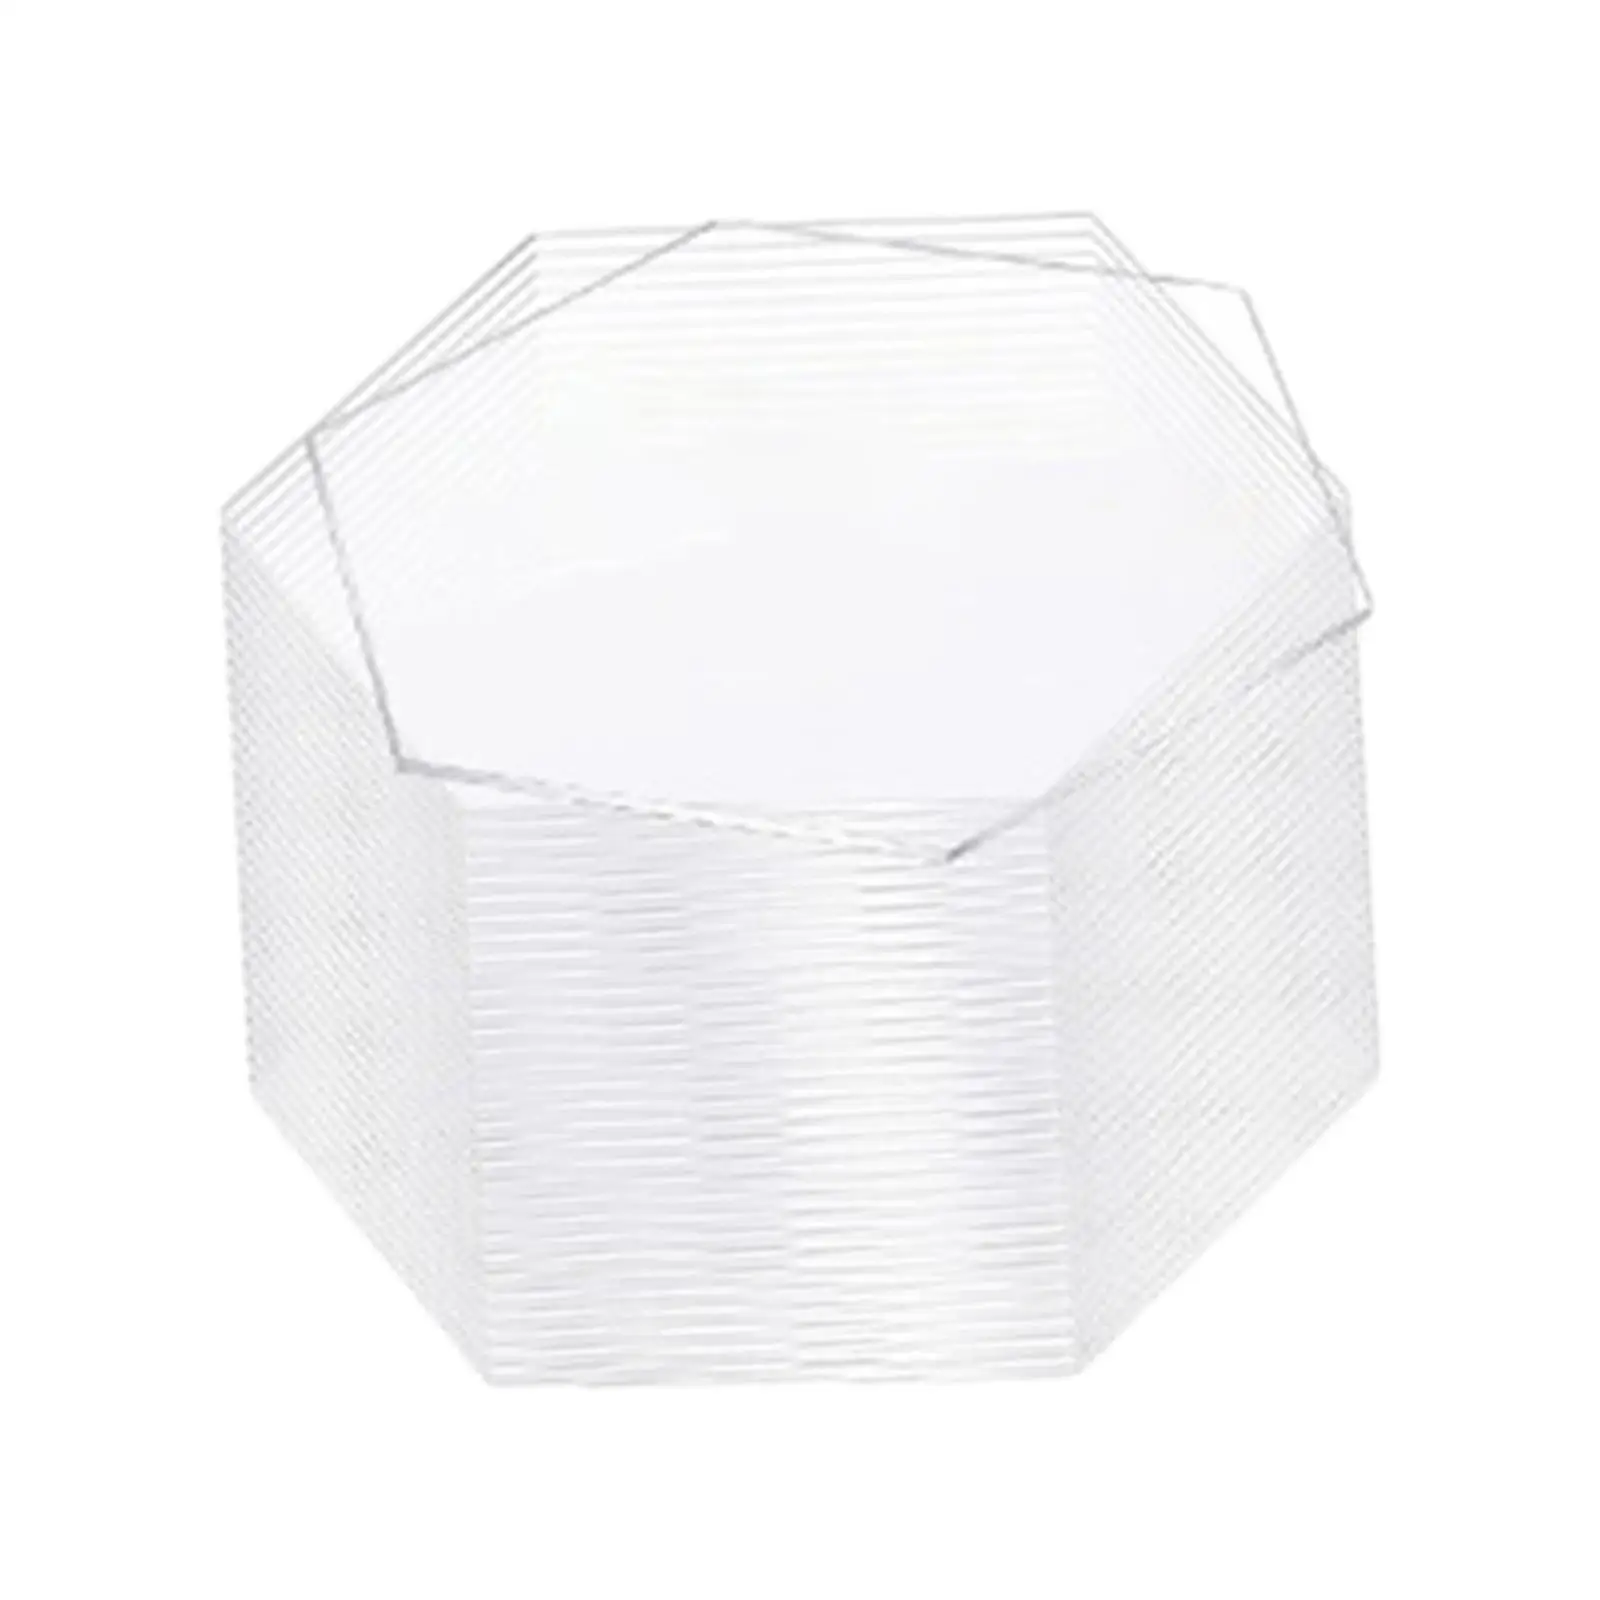 40 Pieces Clear Acrylic Place Cards Reusable Hexagon Table Number Cards for Special Event Dinner Tea Party Birthday Restaurant